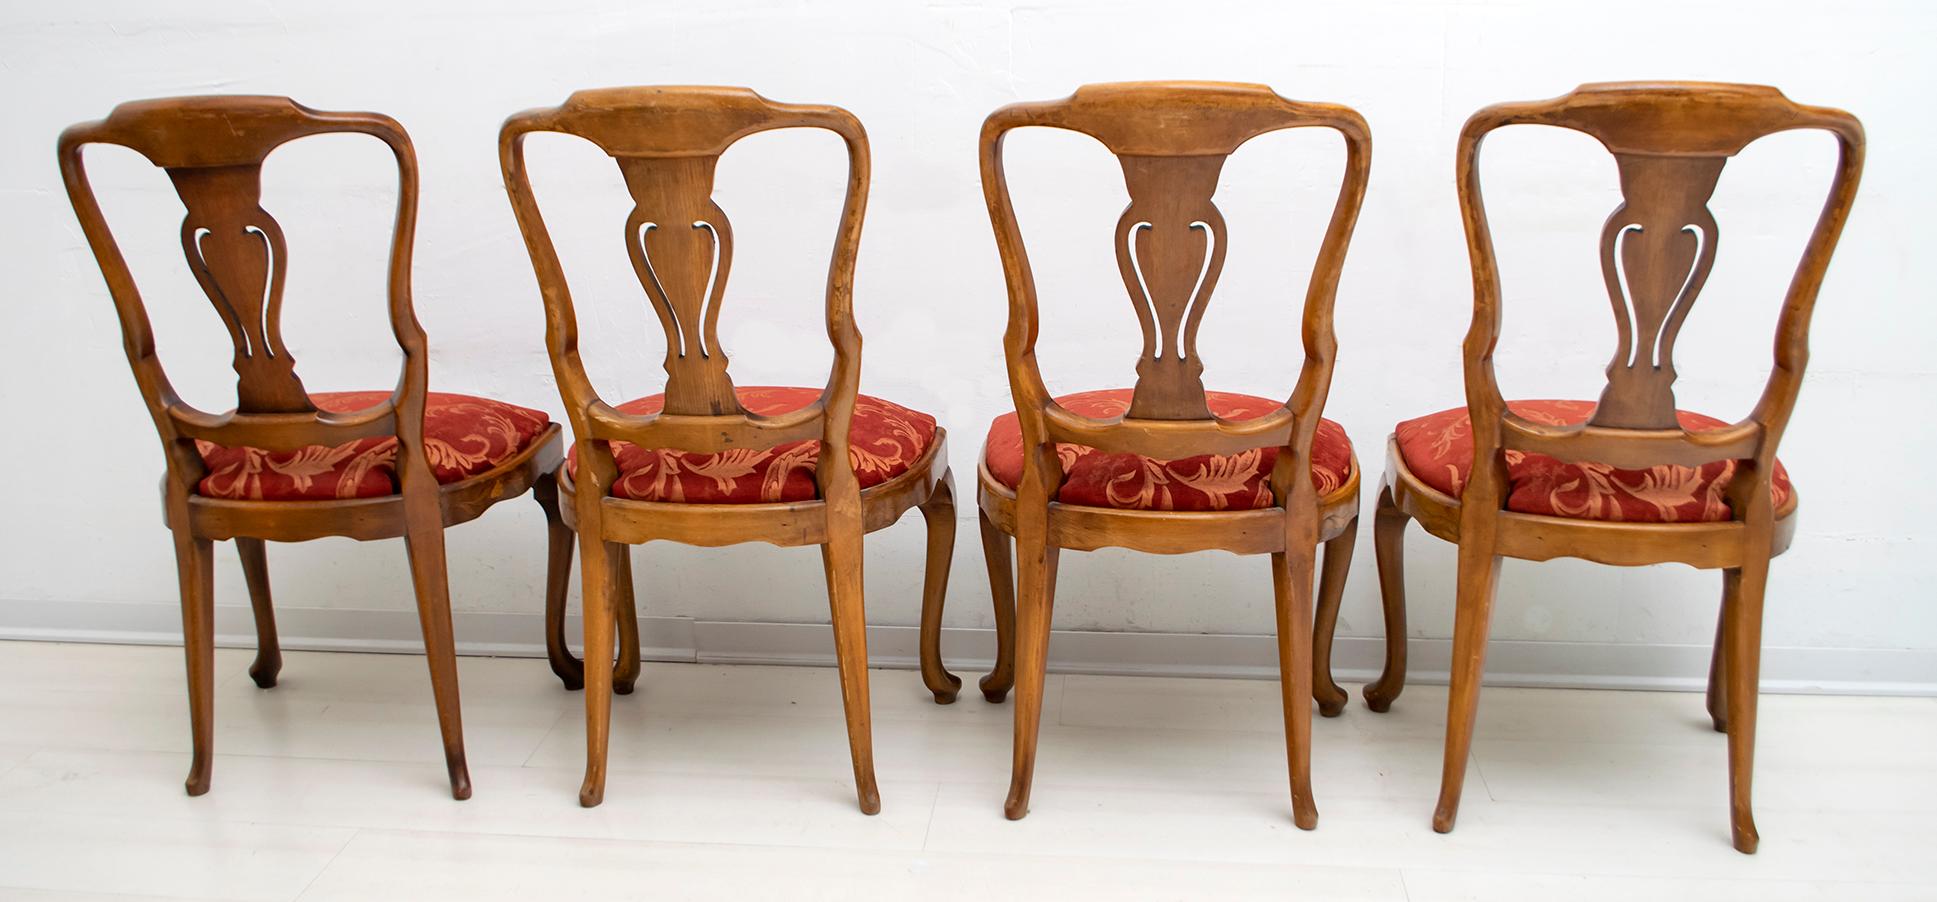 Walnut Dutch Chairs of the 20th Century with Maple Wood Inlays, Netherlands In Fair Condition For Sale In Puglia, Puglia